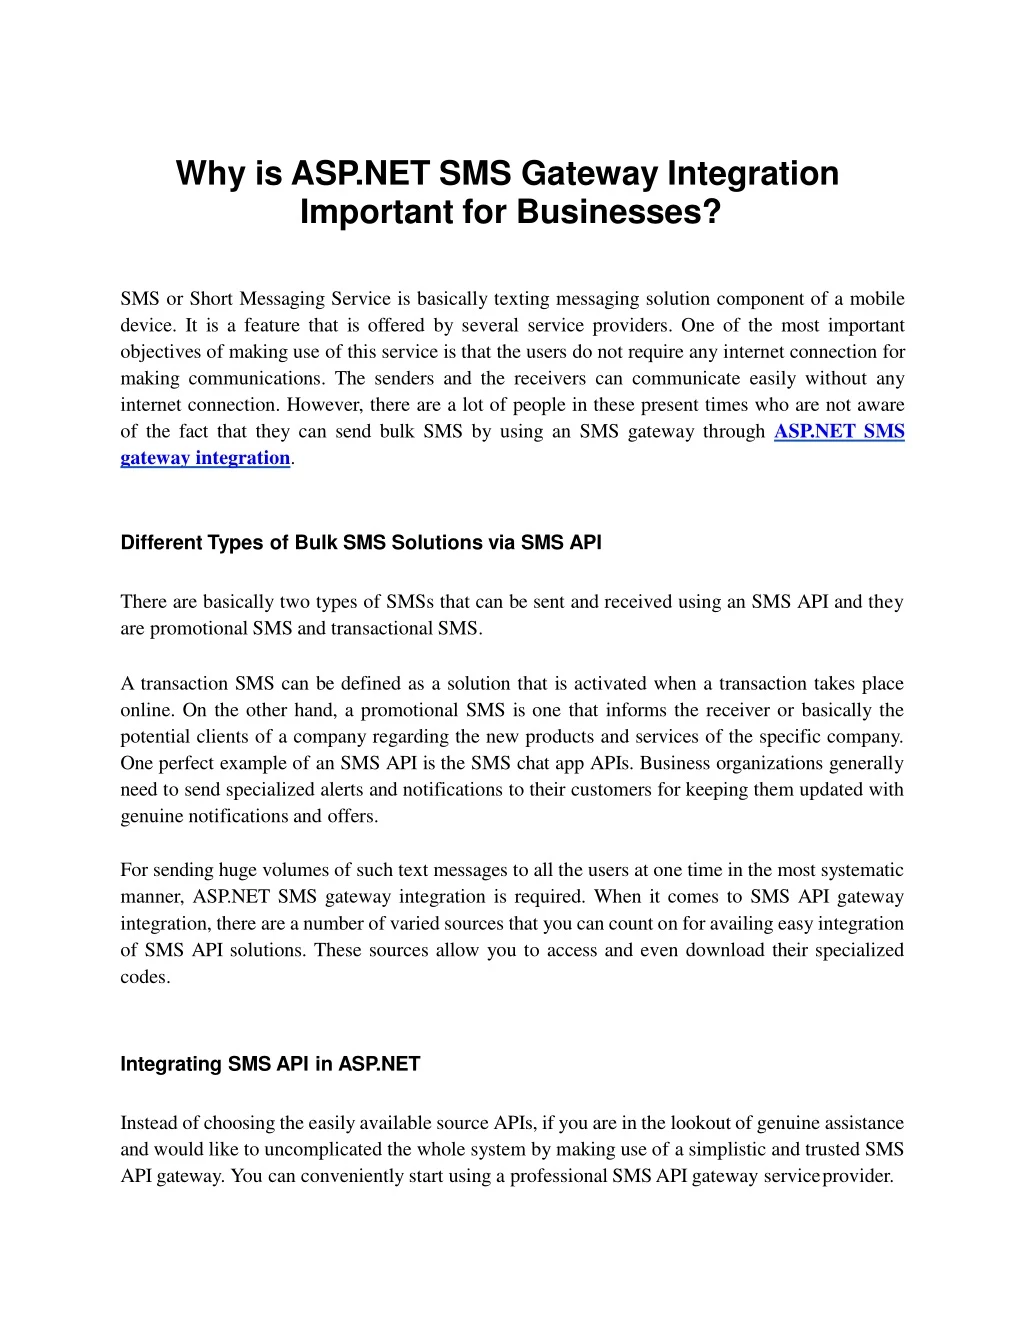 why is asp net sms gateway integration important